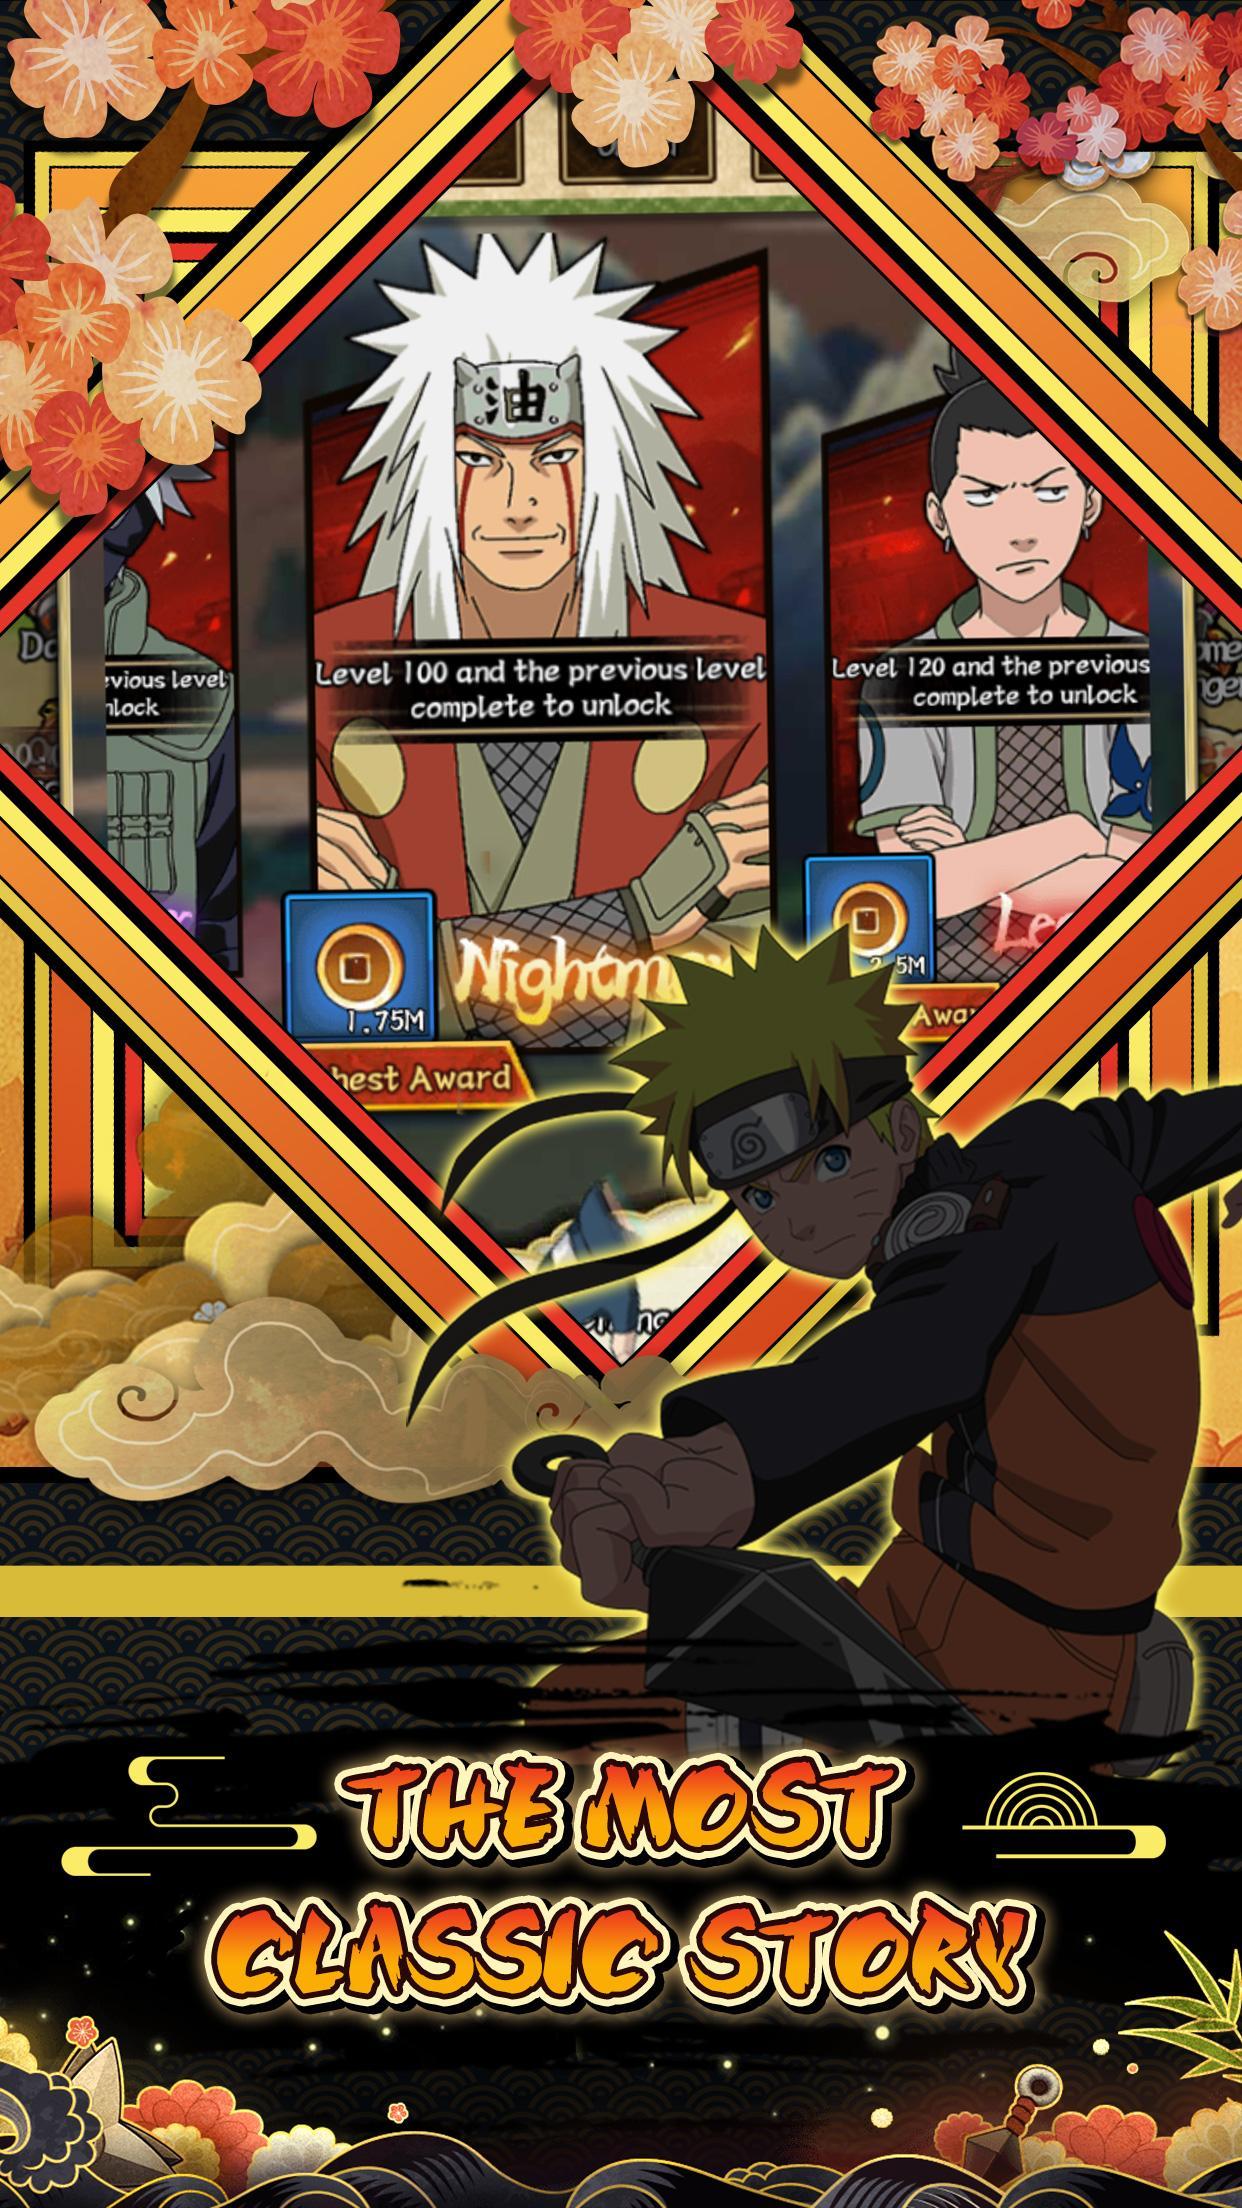 Ninja Thunder Idle: War for Android - APK Download